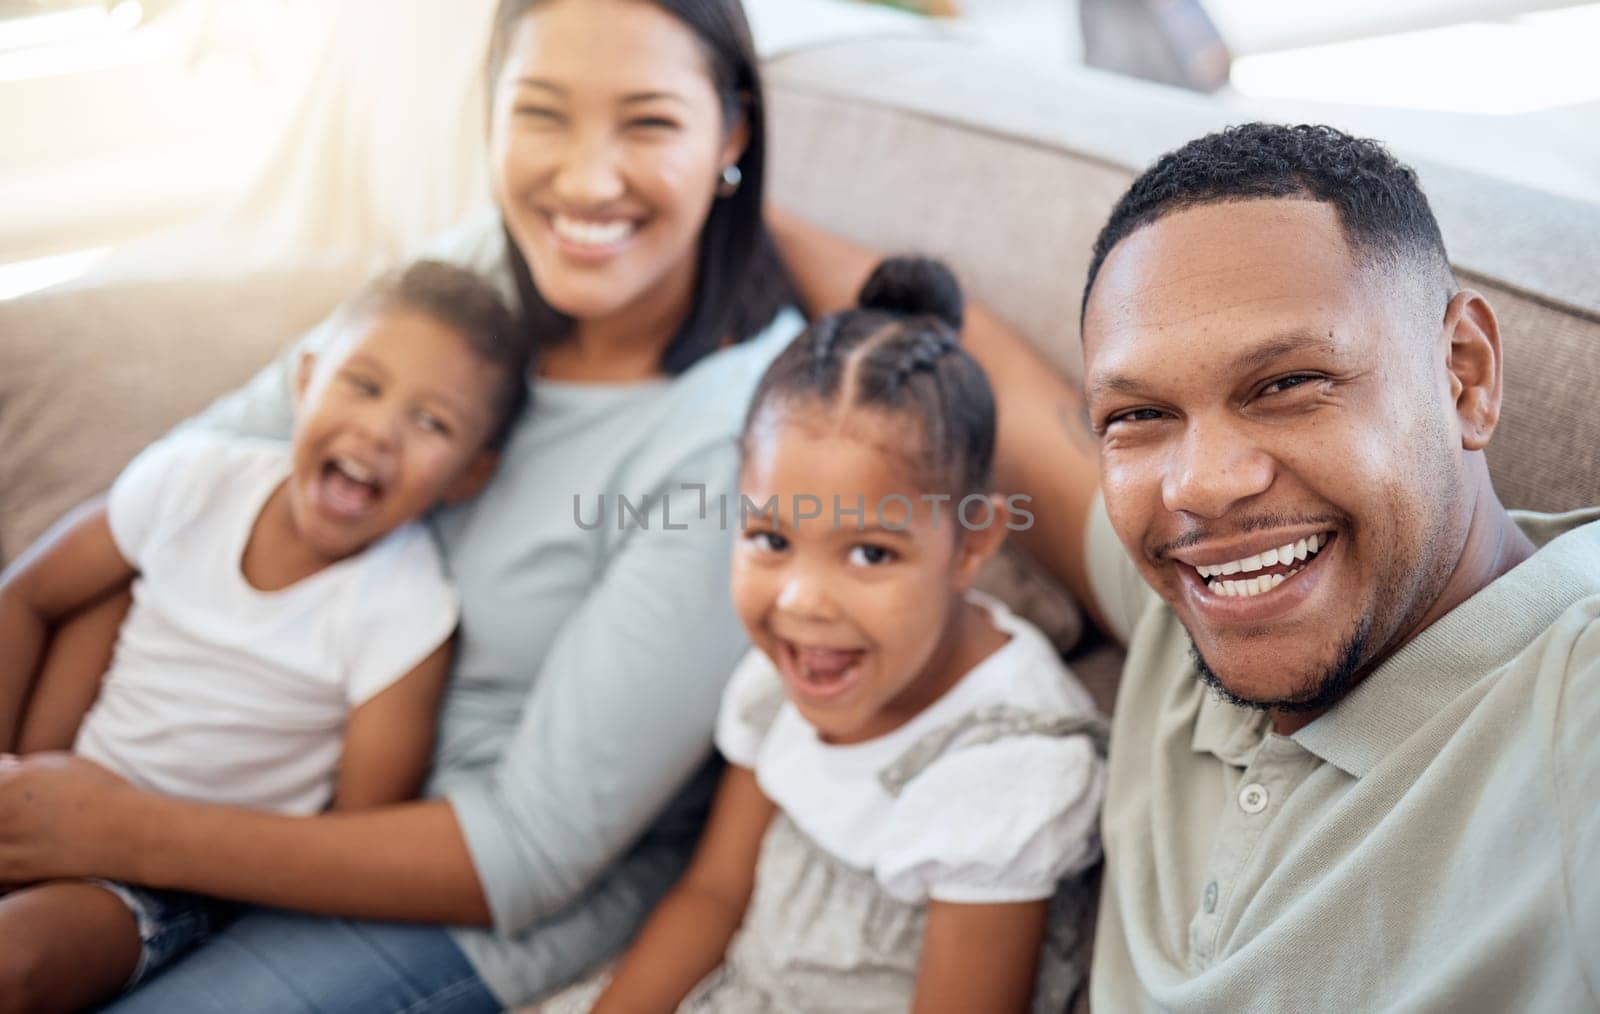 Happy, relax and selfie with family on sofa for smile, support or social media app together. Technology, photographer and portrait of parents with children in living room at home for bonding and care.